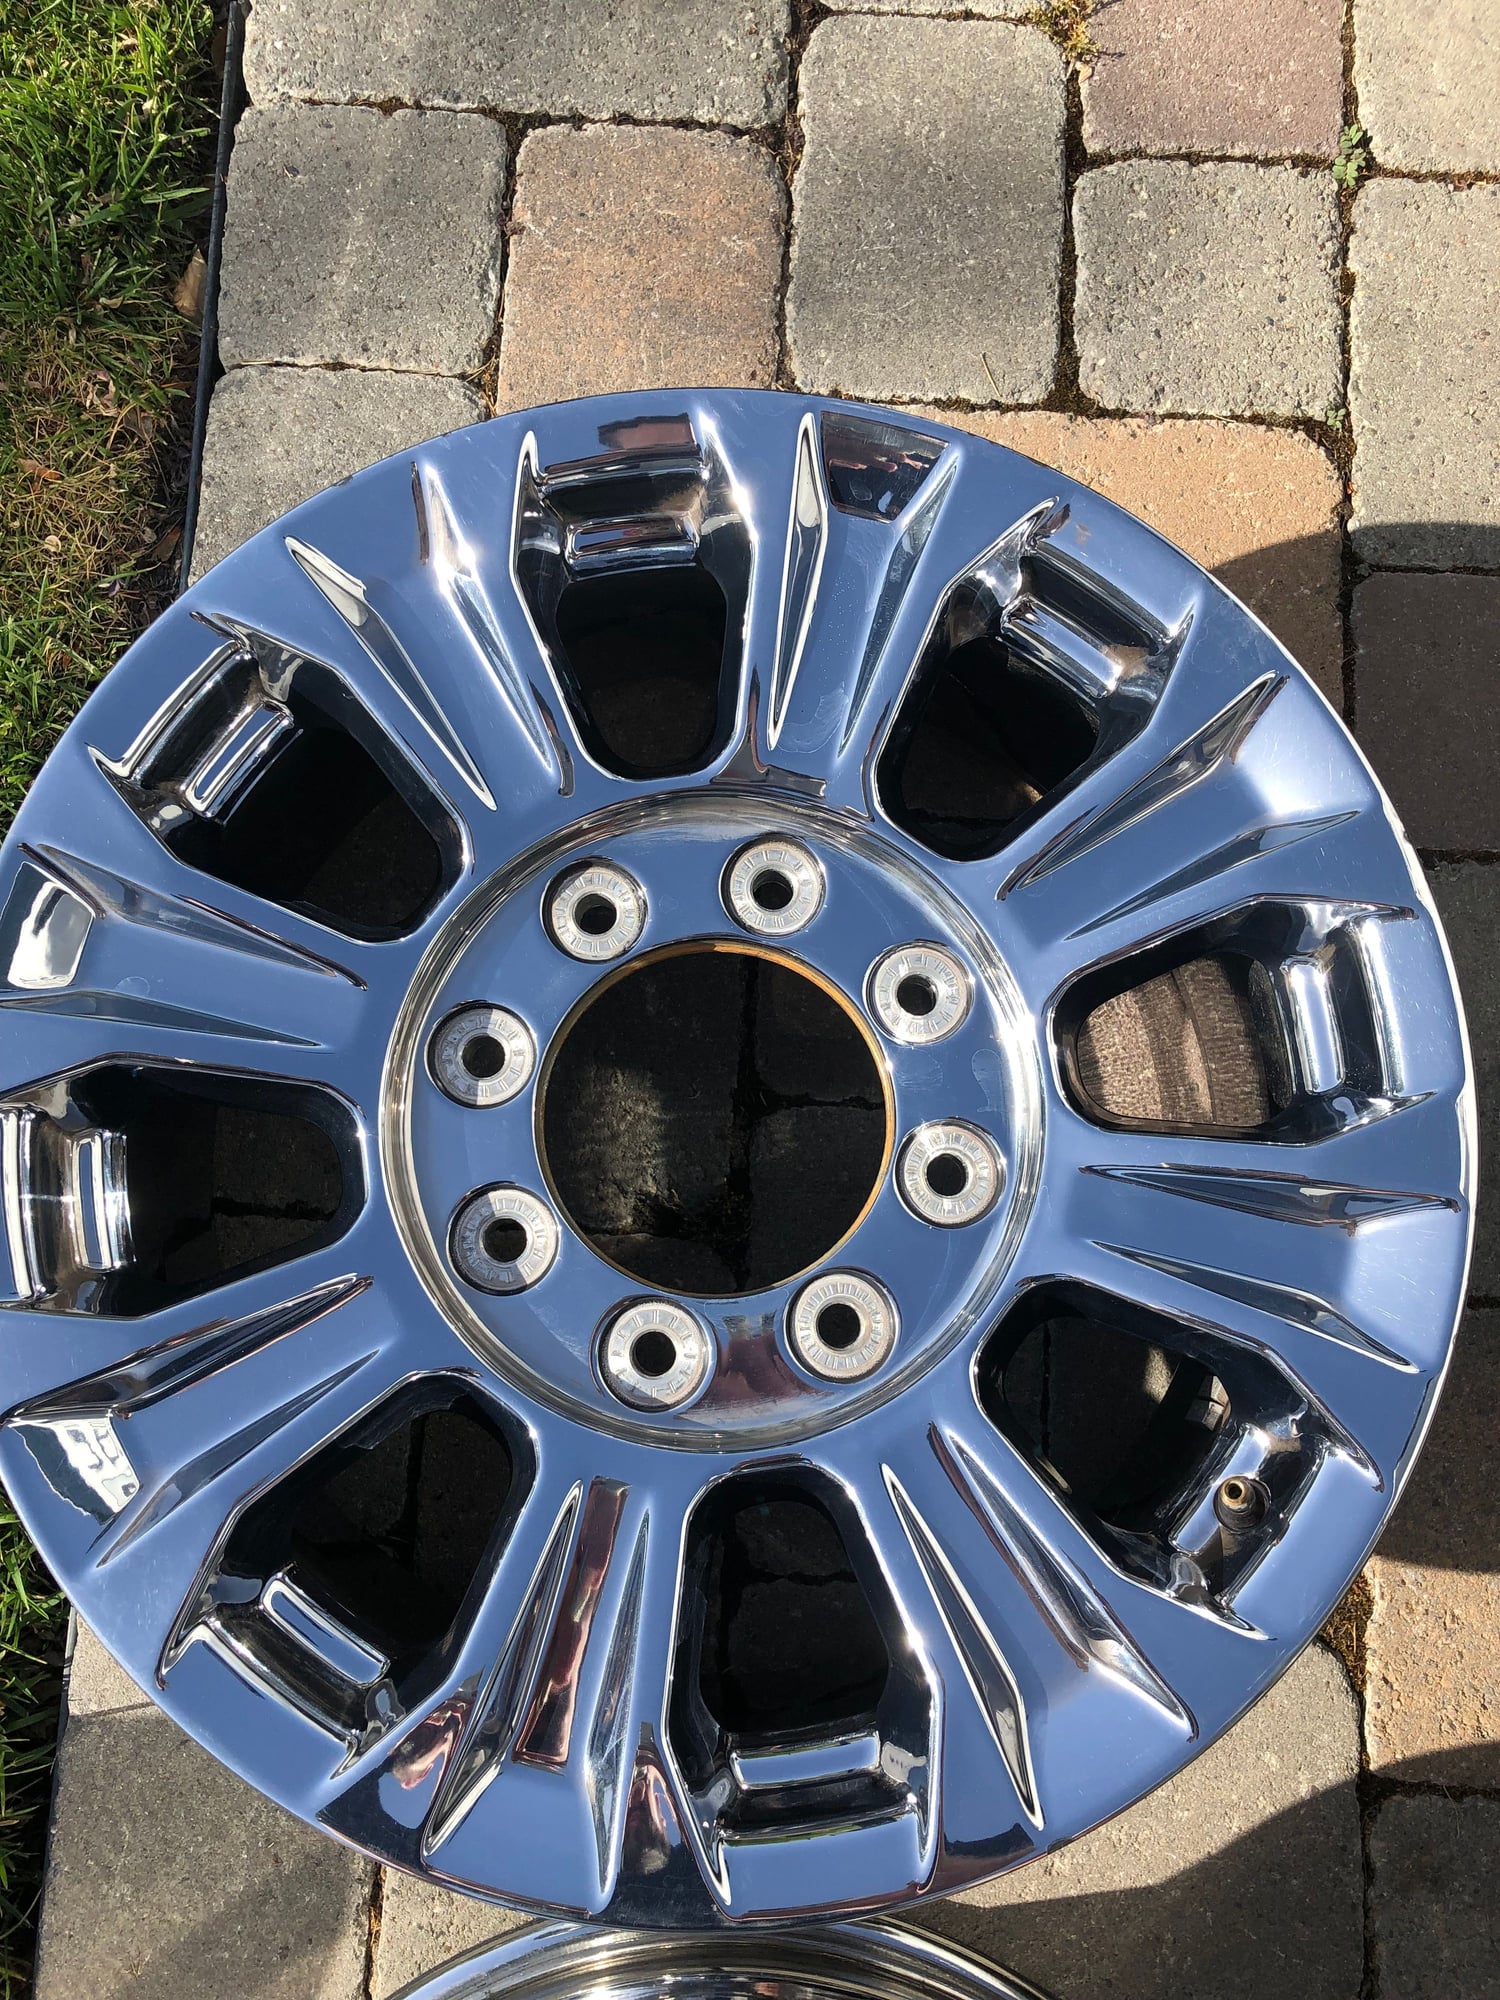 Wheels and Tires/Axles - 2018 Chrome 18" chrome F350 wheels - Used - All Years Ford 1 Ton Pickup - Lincoln, CA 95648, United States